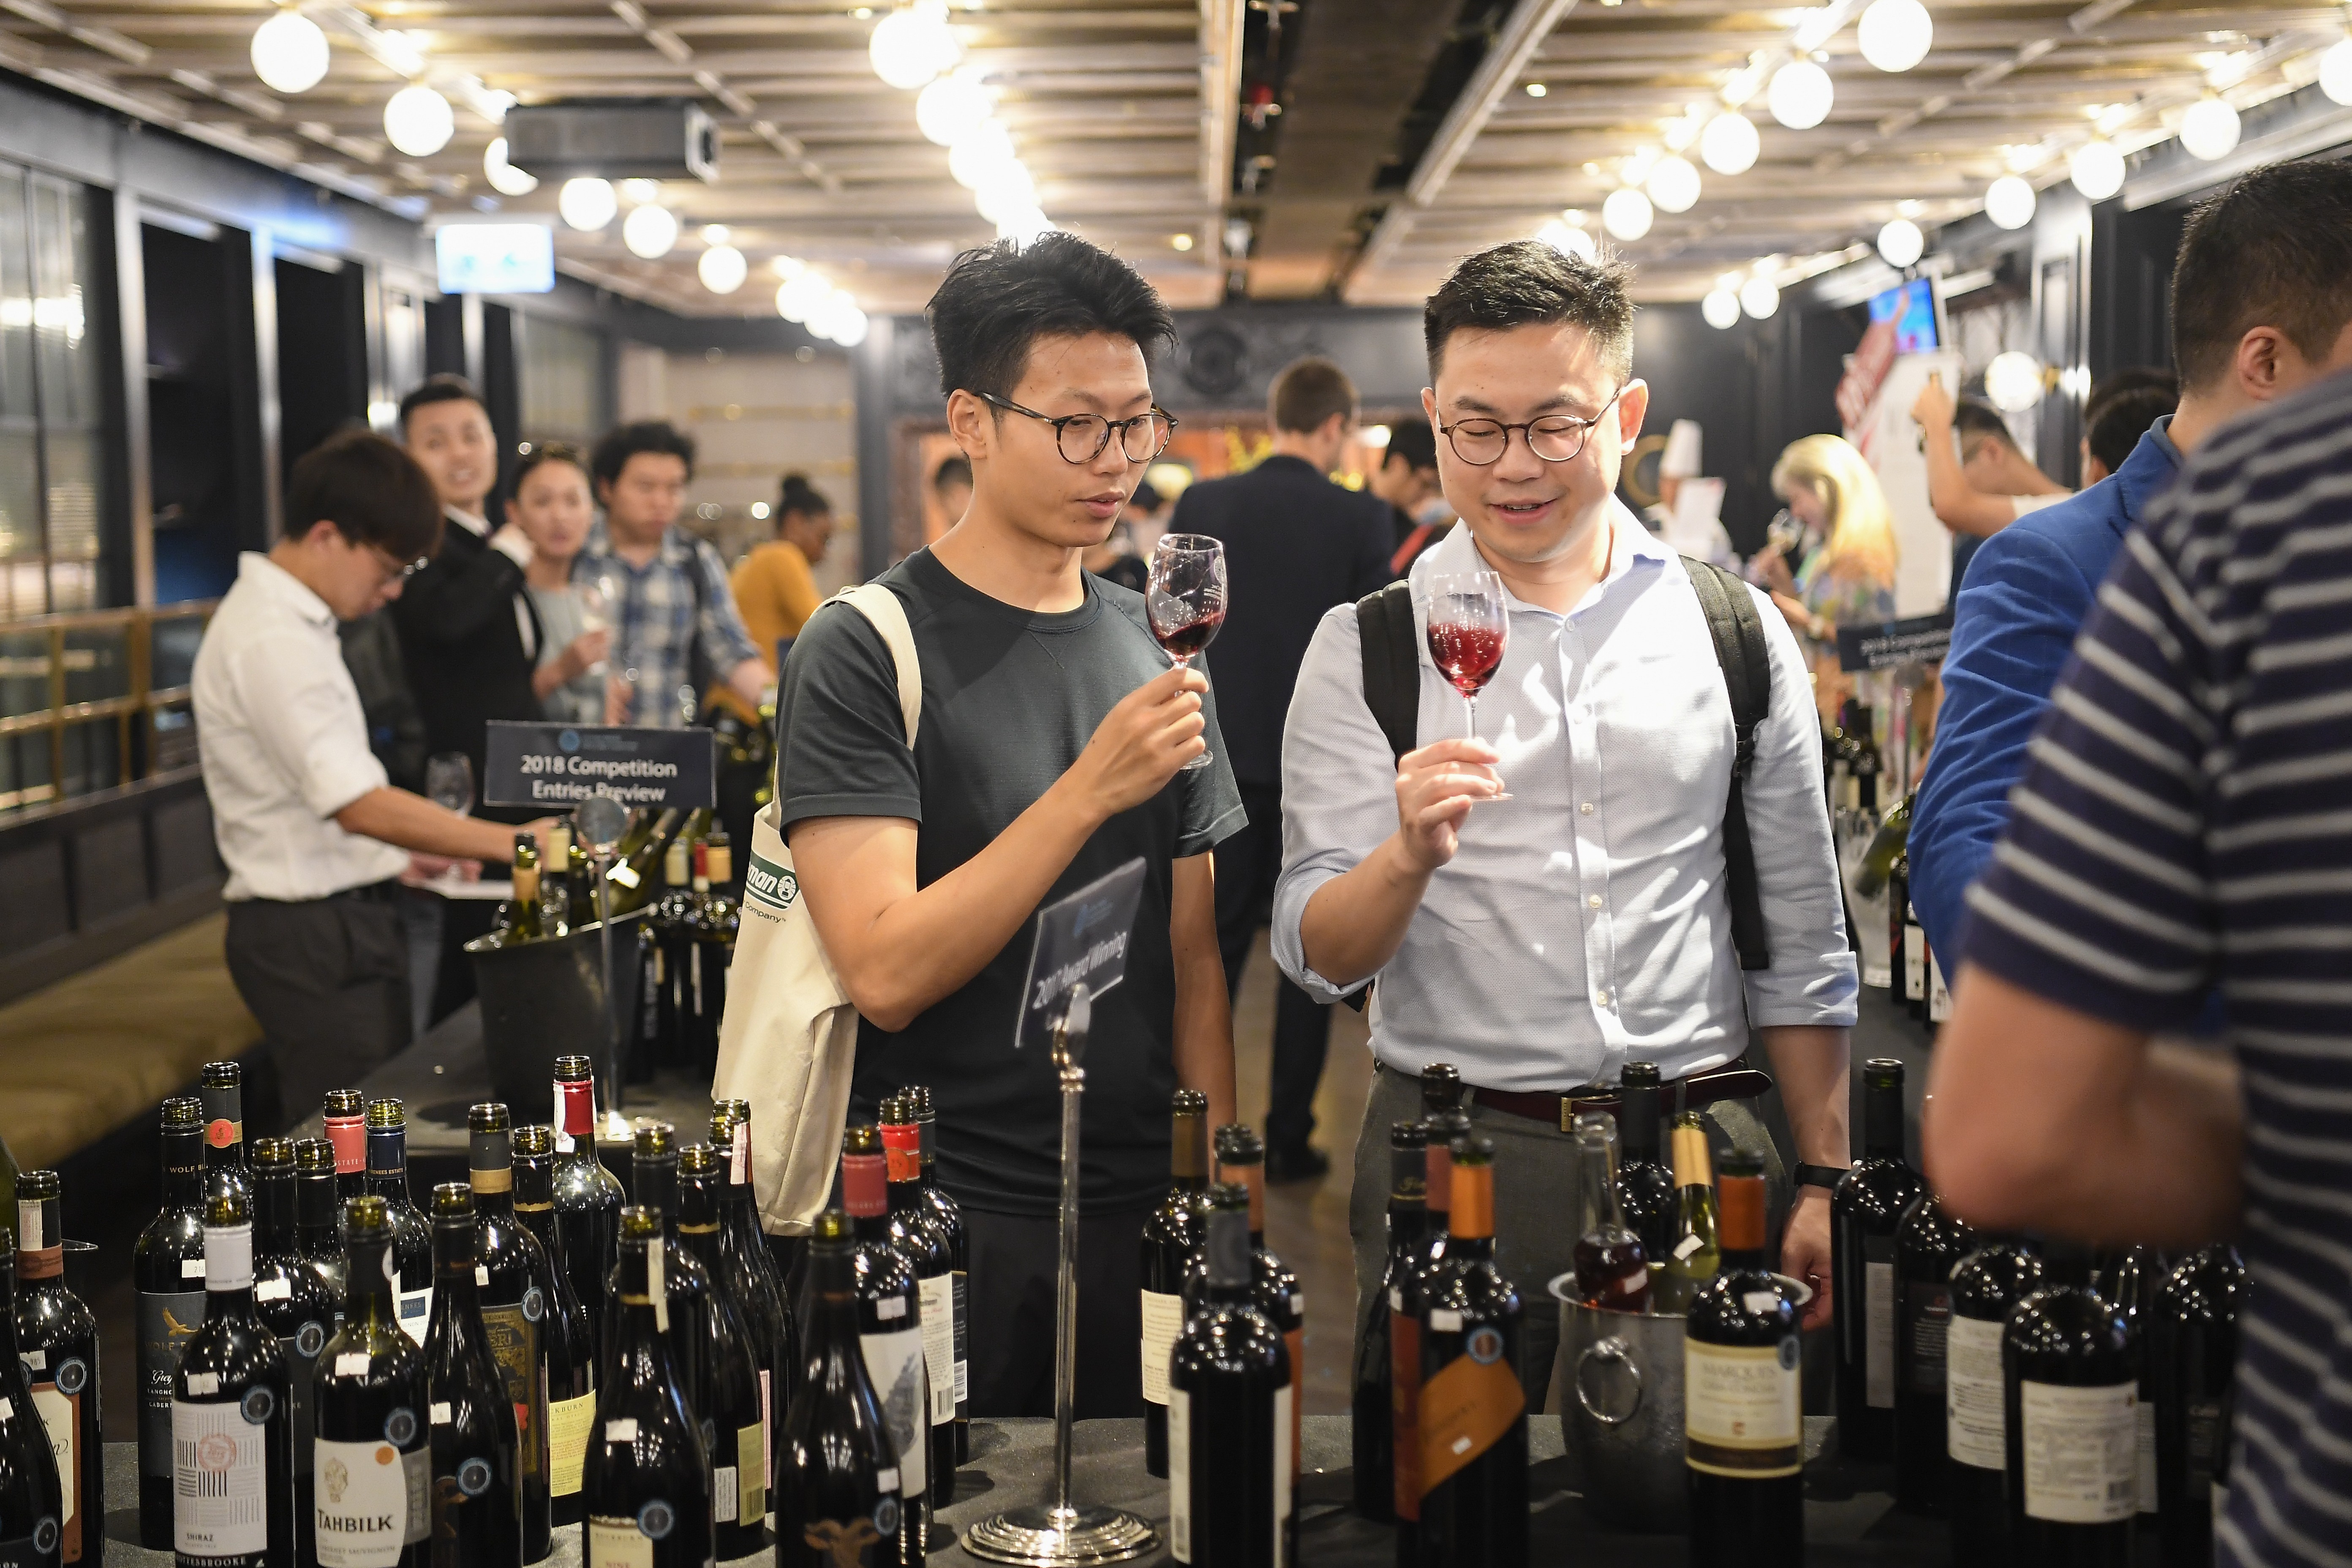 Wine lovers at the 2018 Cathay Pacific Hong Kong International Wine and Spirit Competition (HKIWSC). Photo: Meiburg Wine Media